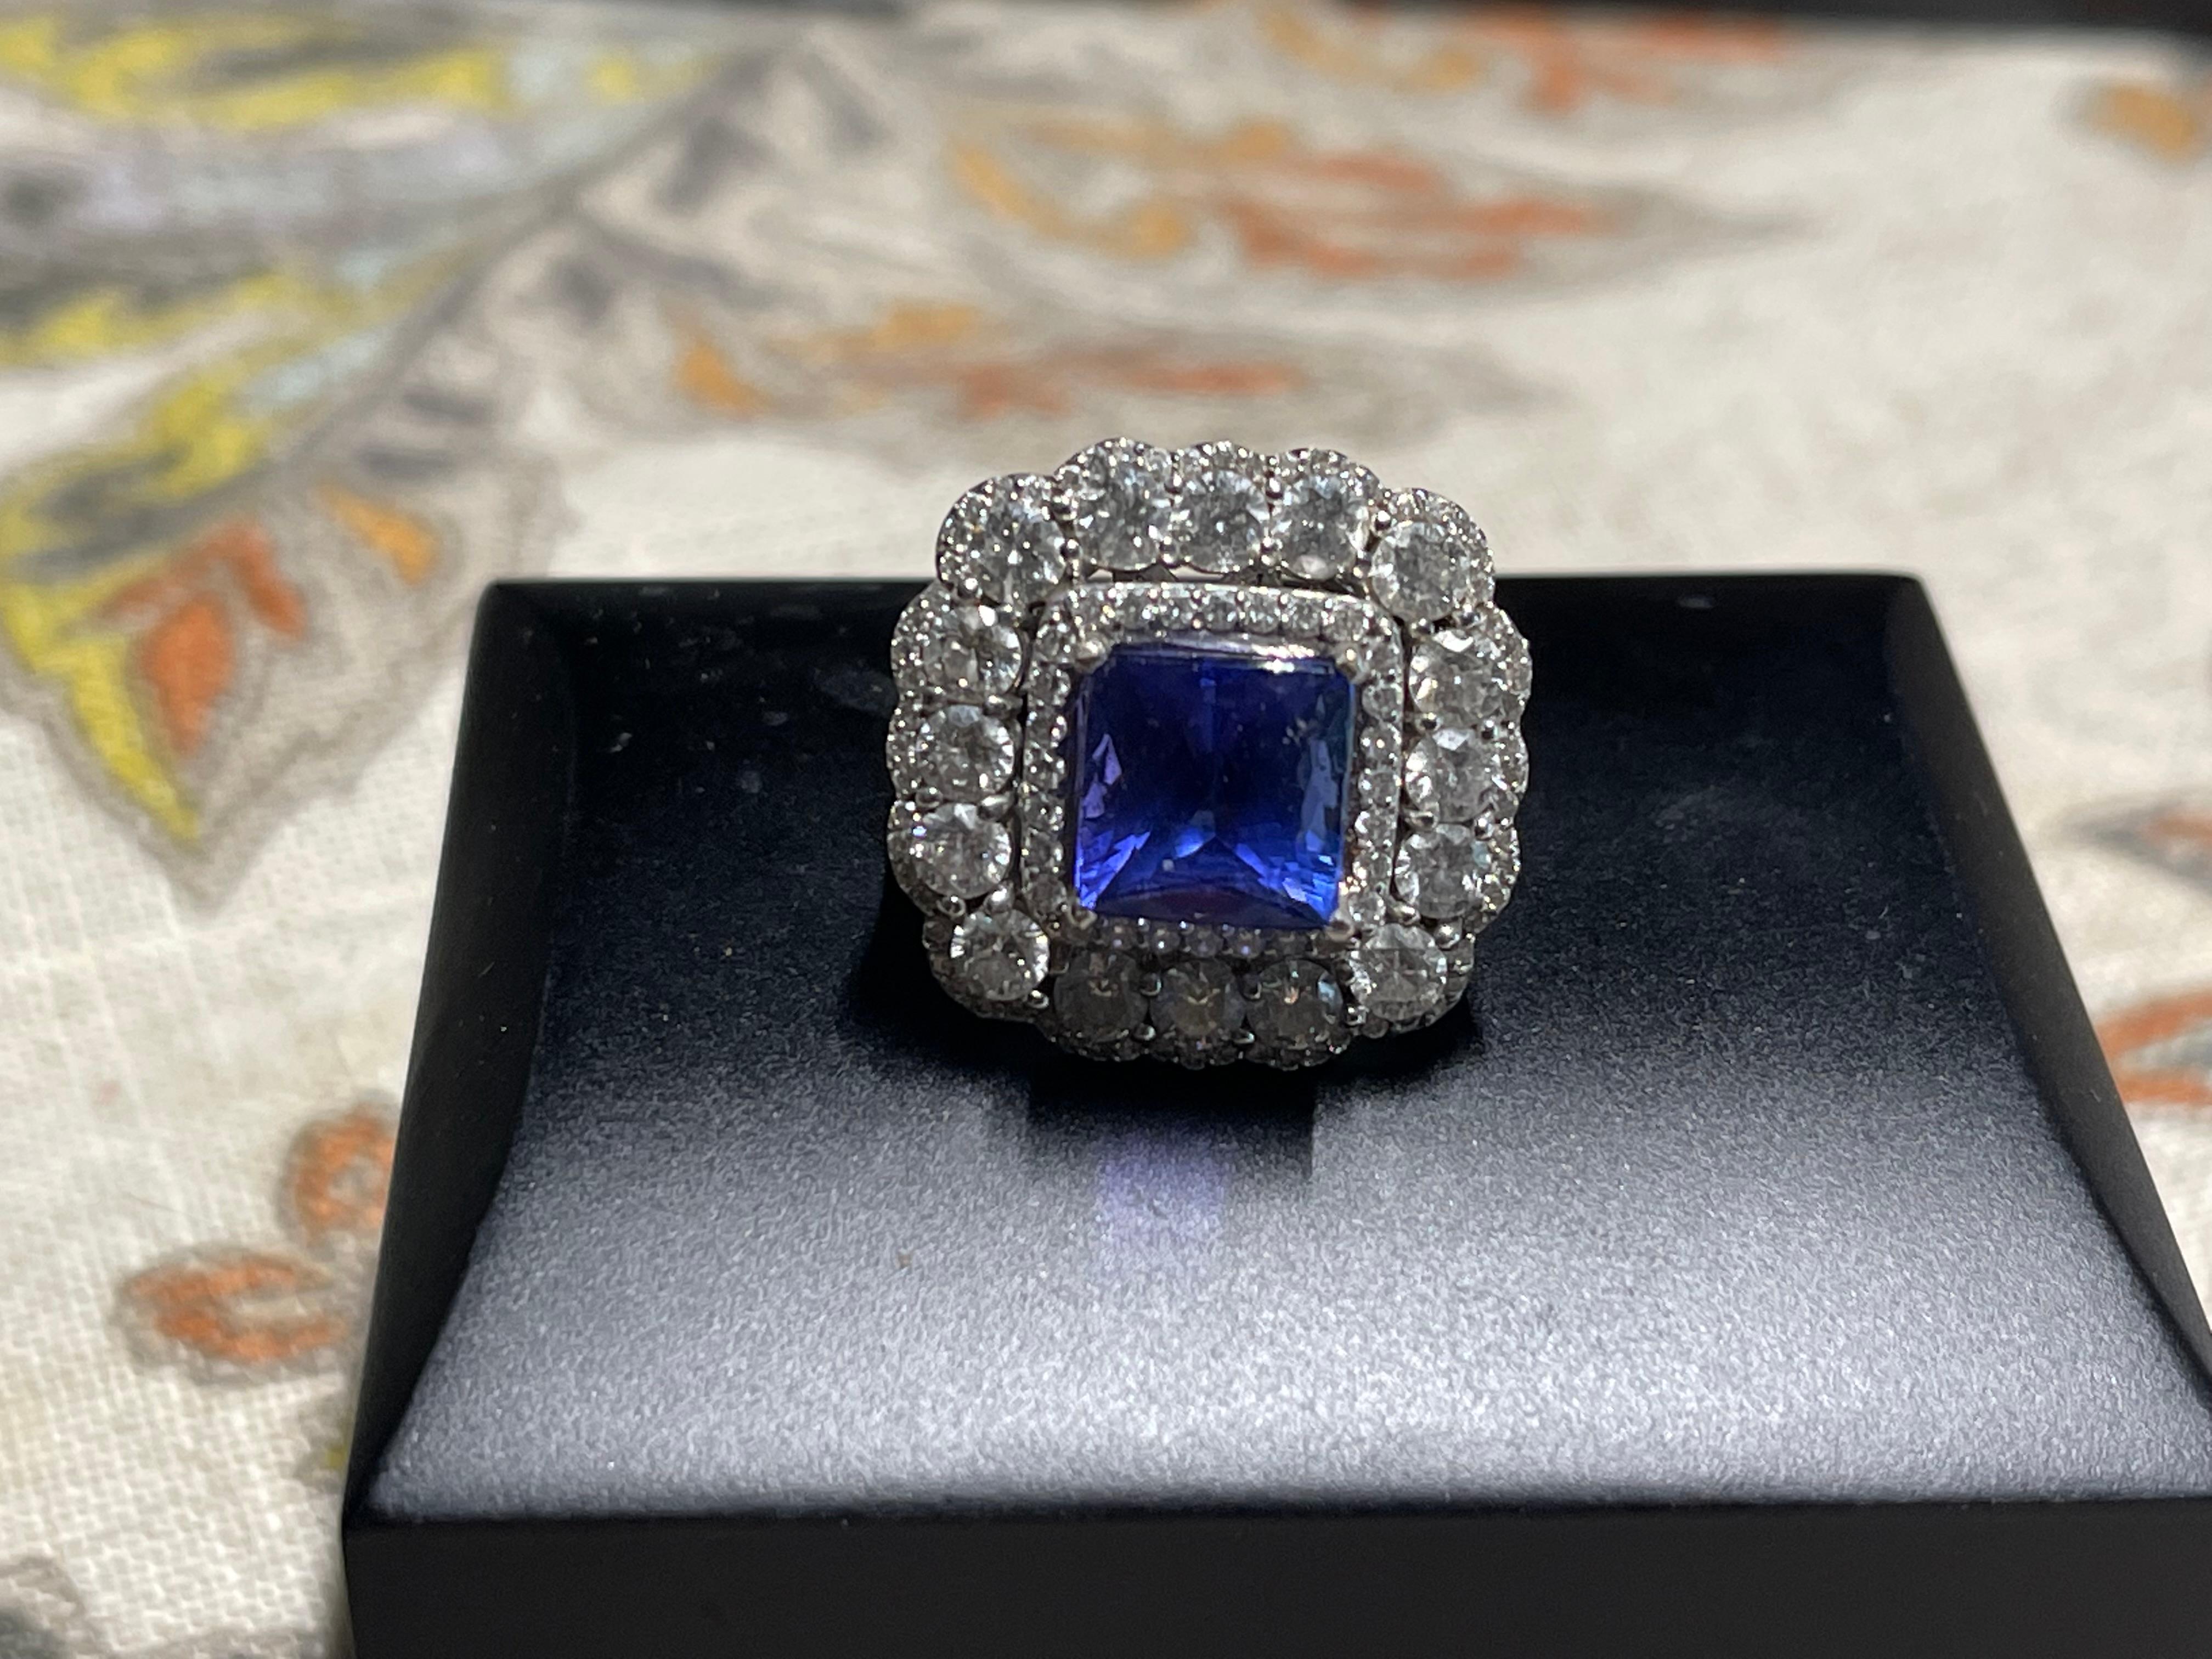 Stunning 5.92 CTW AAAA/Block D Tanzanite and 3.82 CTW full count round sparkling diamonds with G/H color and SI-11 clarity in 18k white gold.  A fabulous old school cocktail ring that will receive compliments every time you wear it.  What a stunning